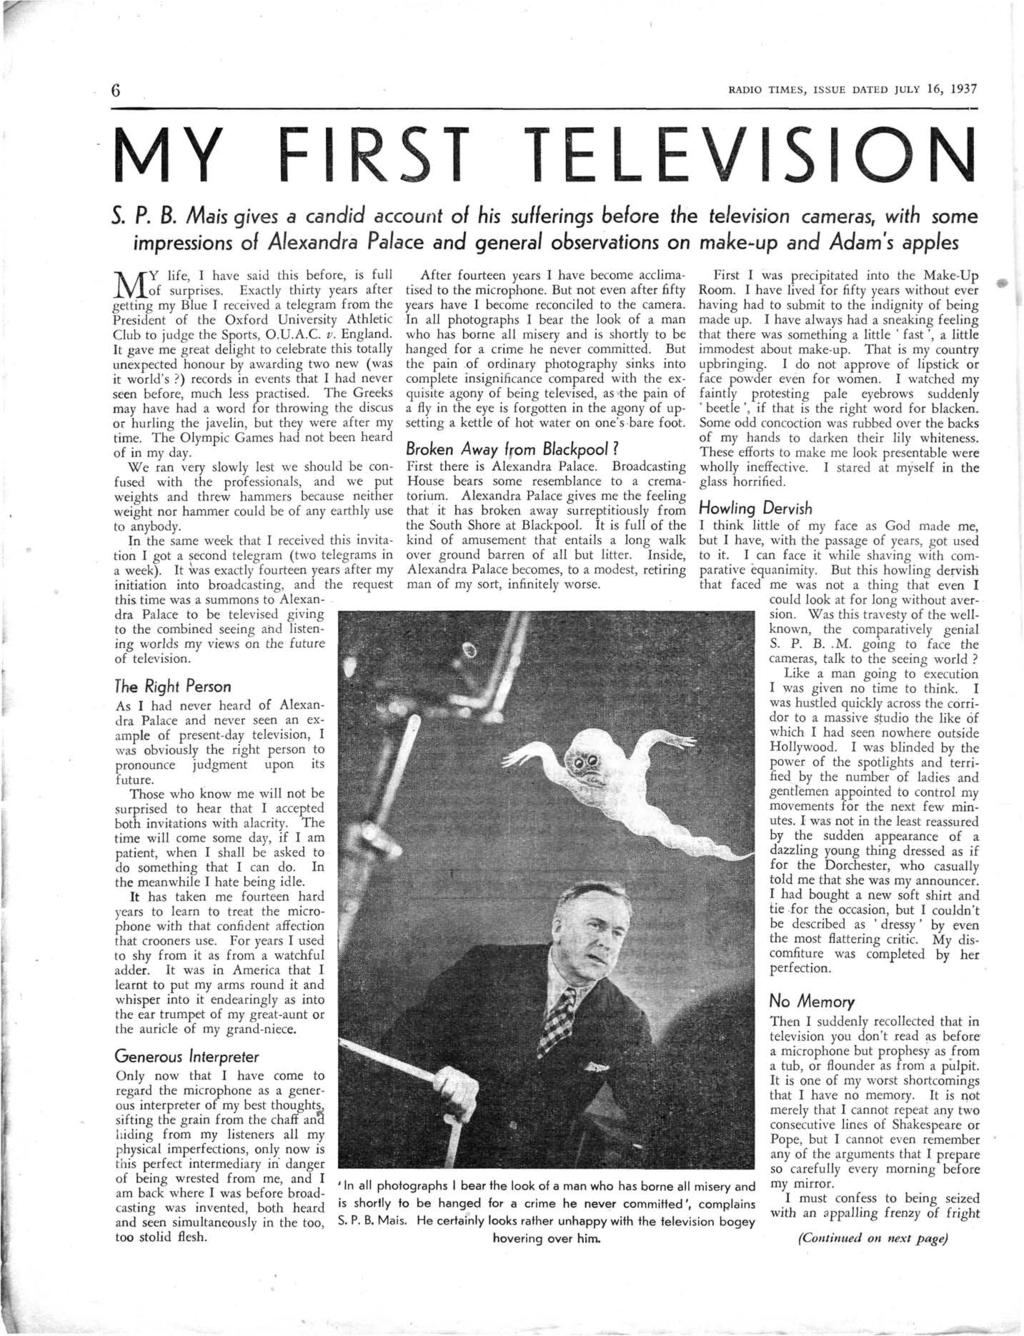 RADIO TIMES, ISSUE DATED JULY 16, 1937 MY FIRST TELEVISION S. P. B.